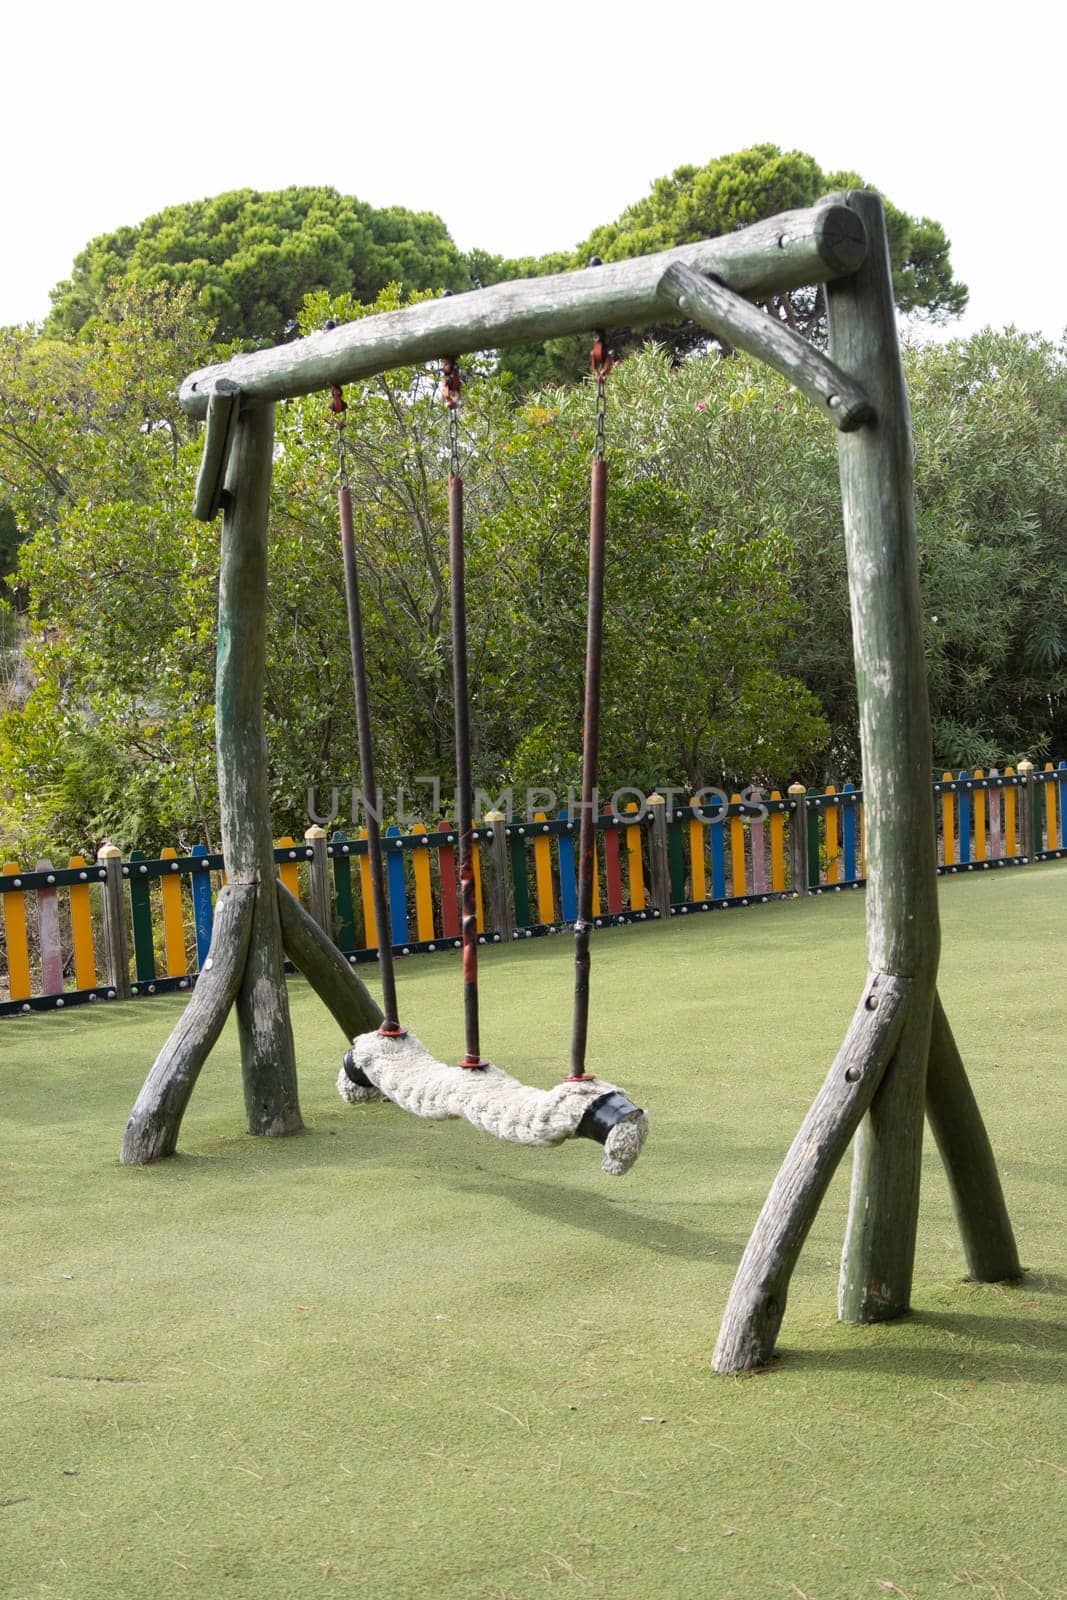 Large playground swings made from solid tree trunks by Studia72